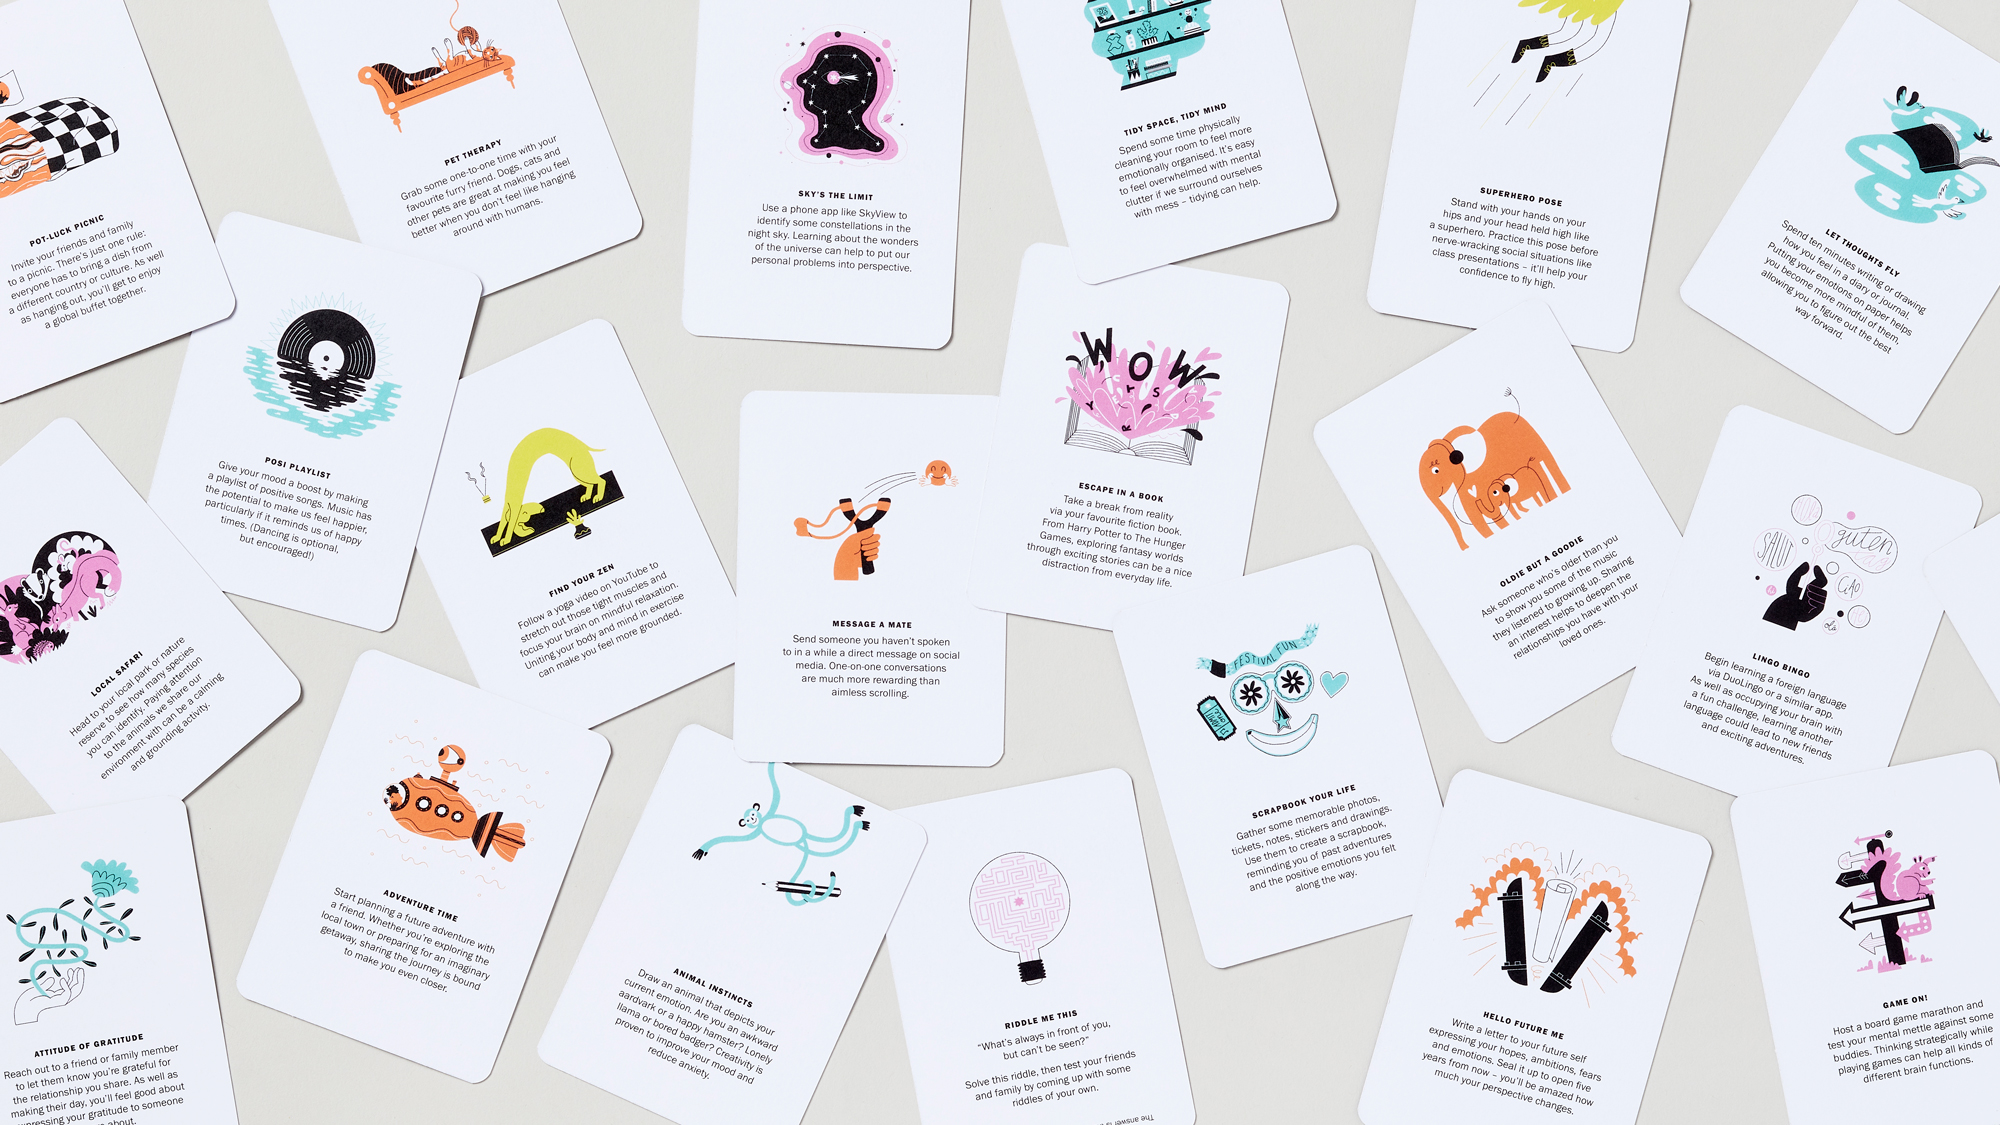 Large selection of mental wellbeing cards depicting activities through illustration, randomly placed on a grey background